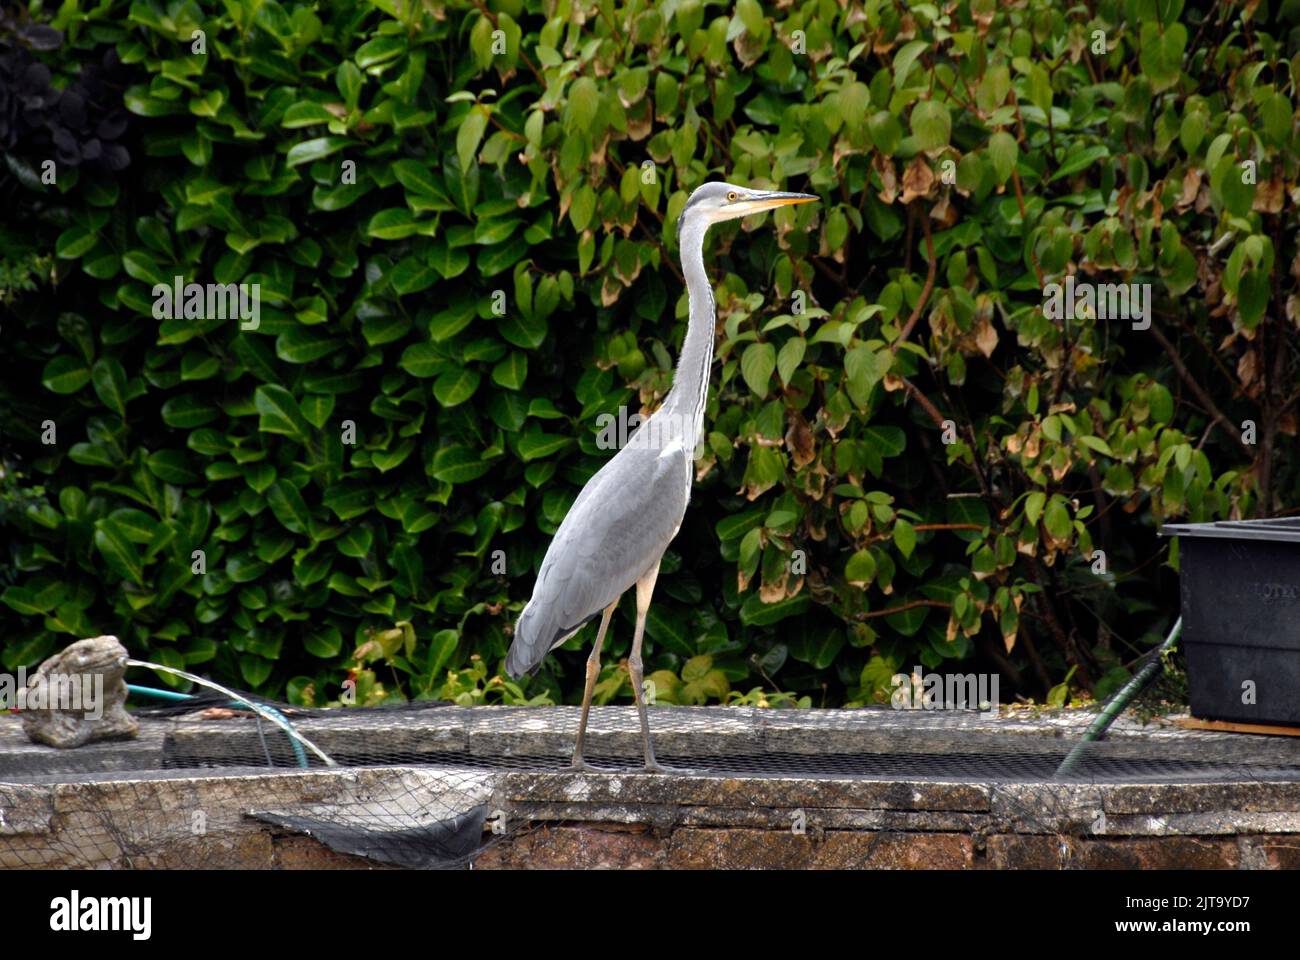 Heron standing aloof on netted domestic garden pond Stock Photo